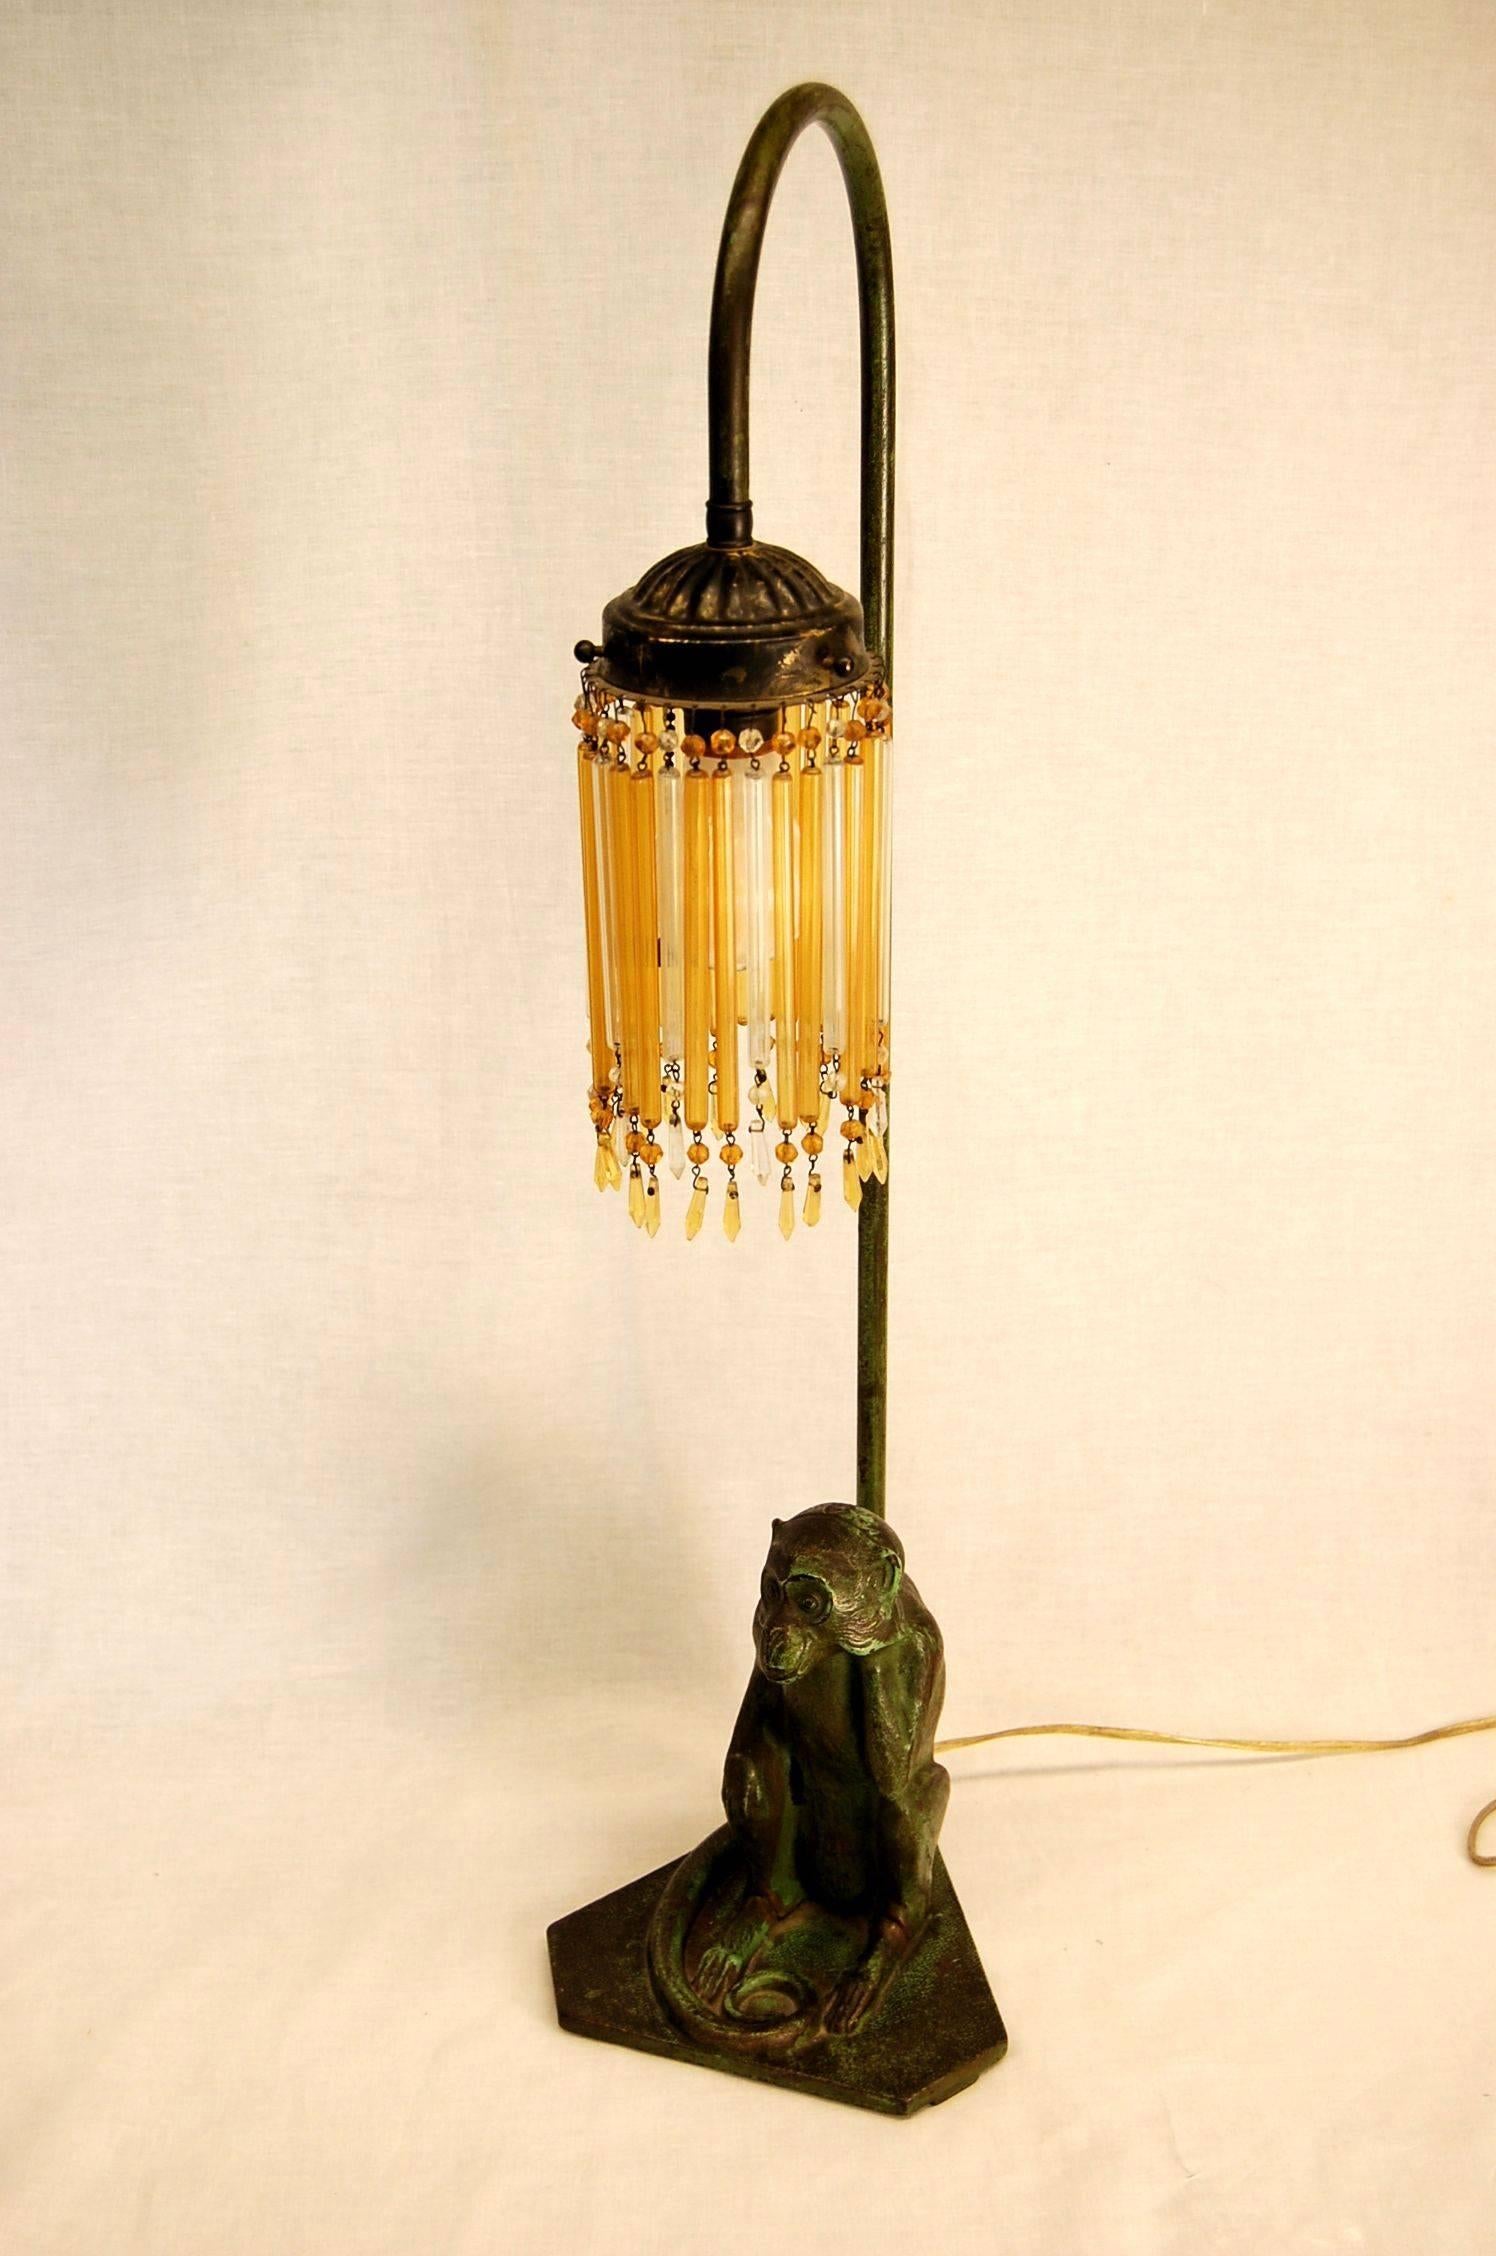 Cast Late 19th Century Steel Figure of Monkey Table Lamp Base with Amber Glass Drops